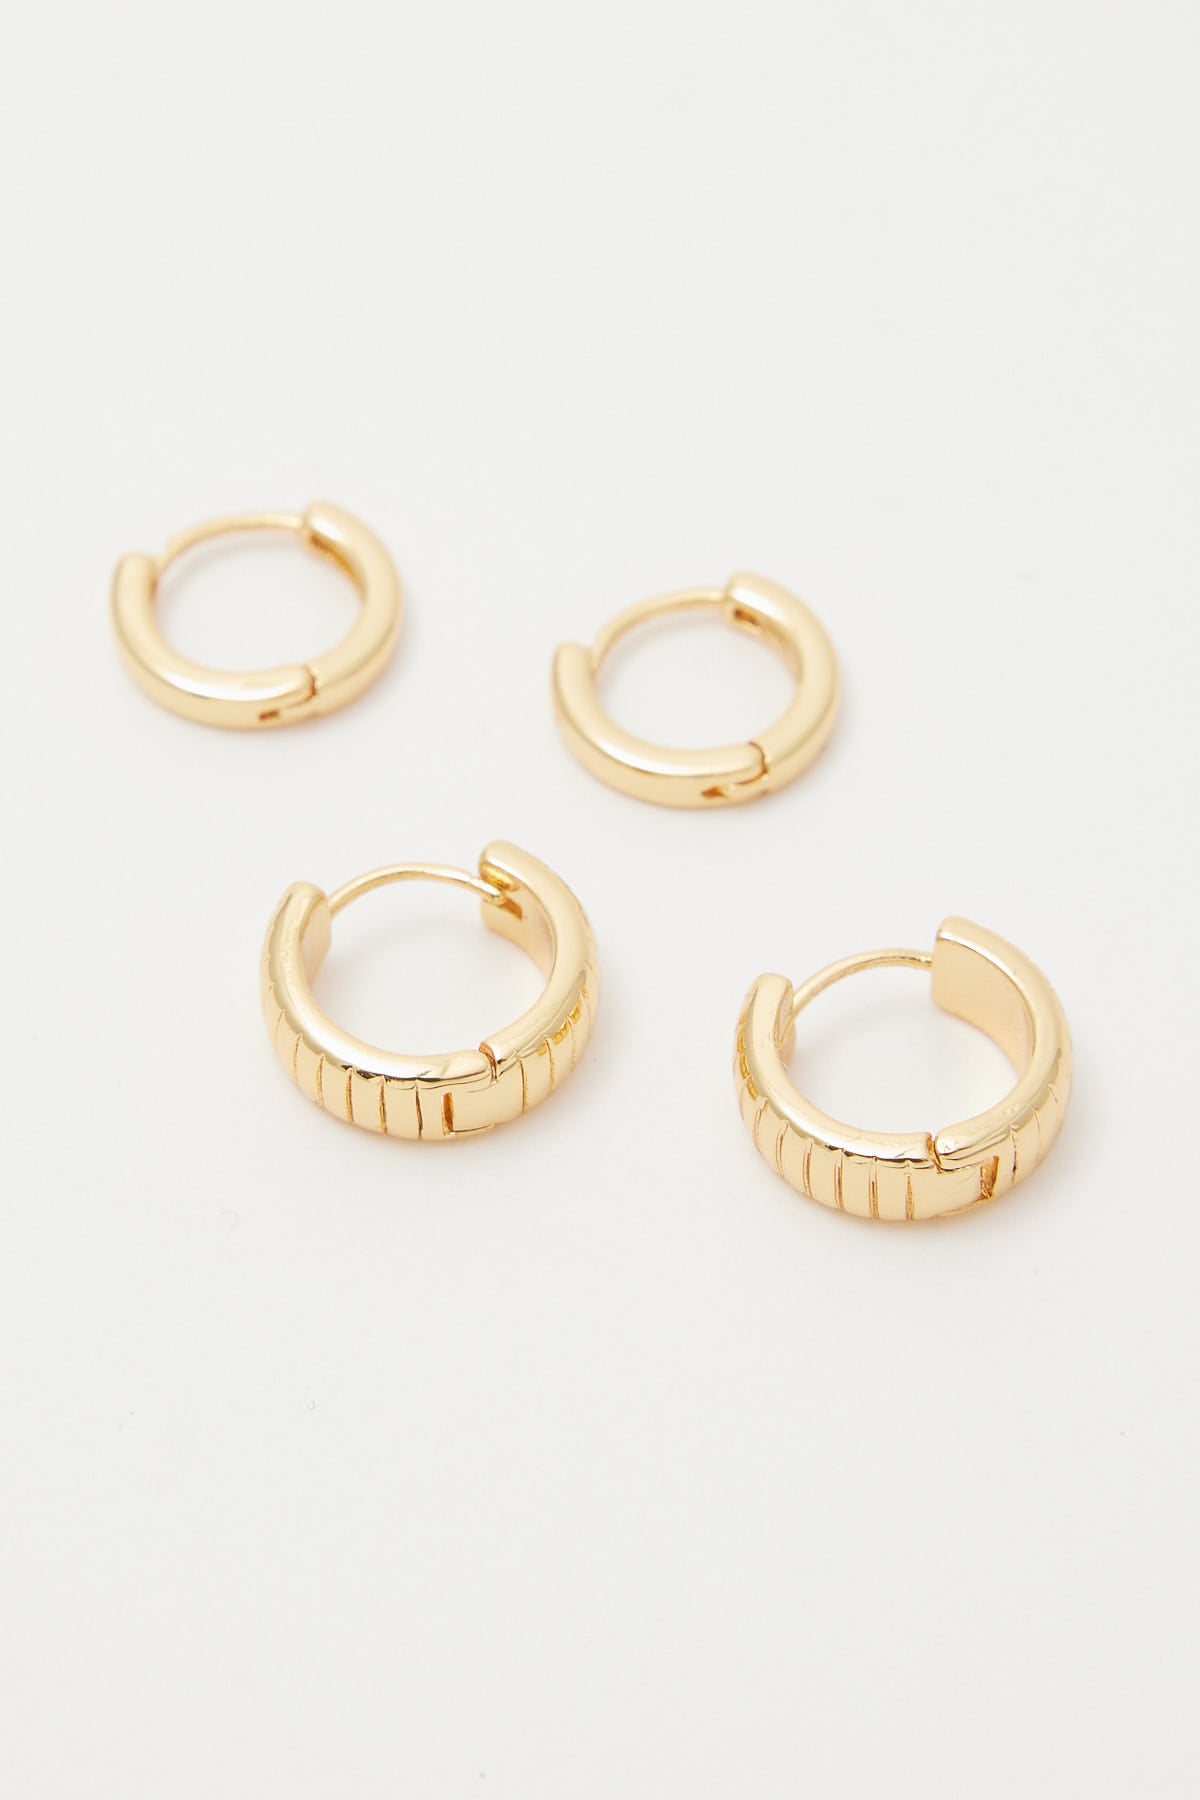 Perfect Stranger Classy Plated Huggie Earring Pack - 18K Gold Plated Gold